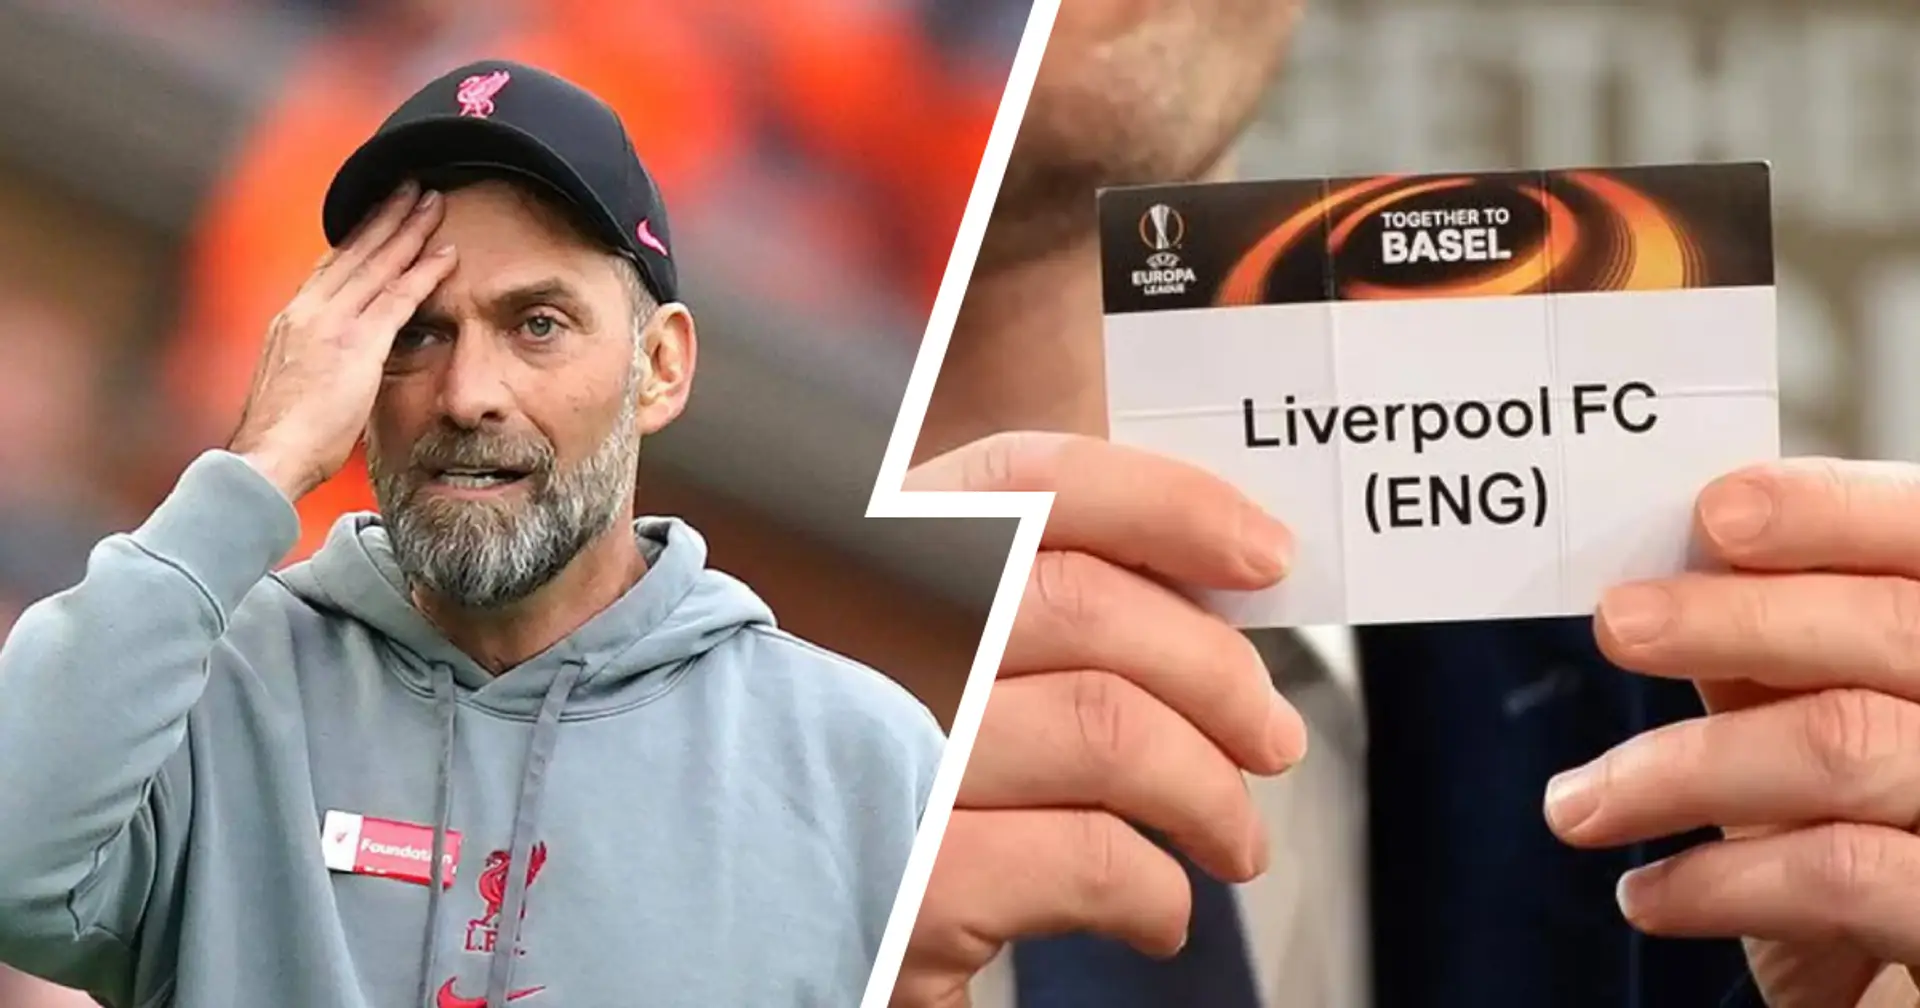 2023/24 Europa League group stage pots: Liverpool's place confirmed